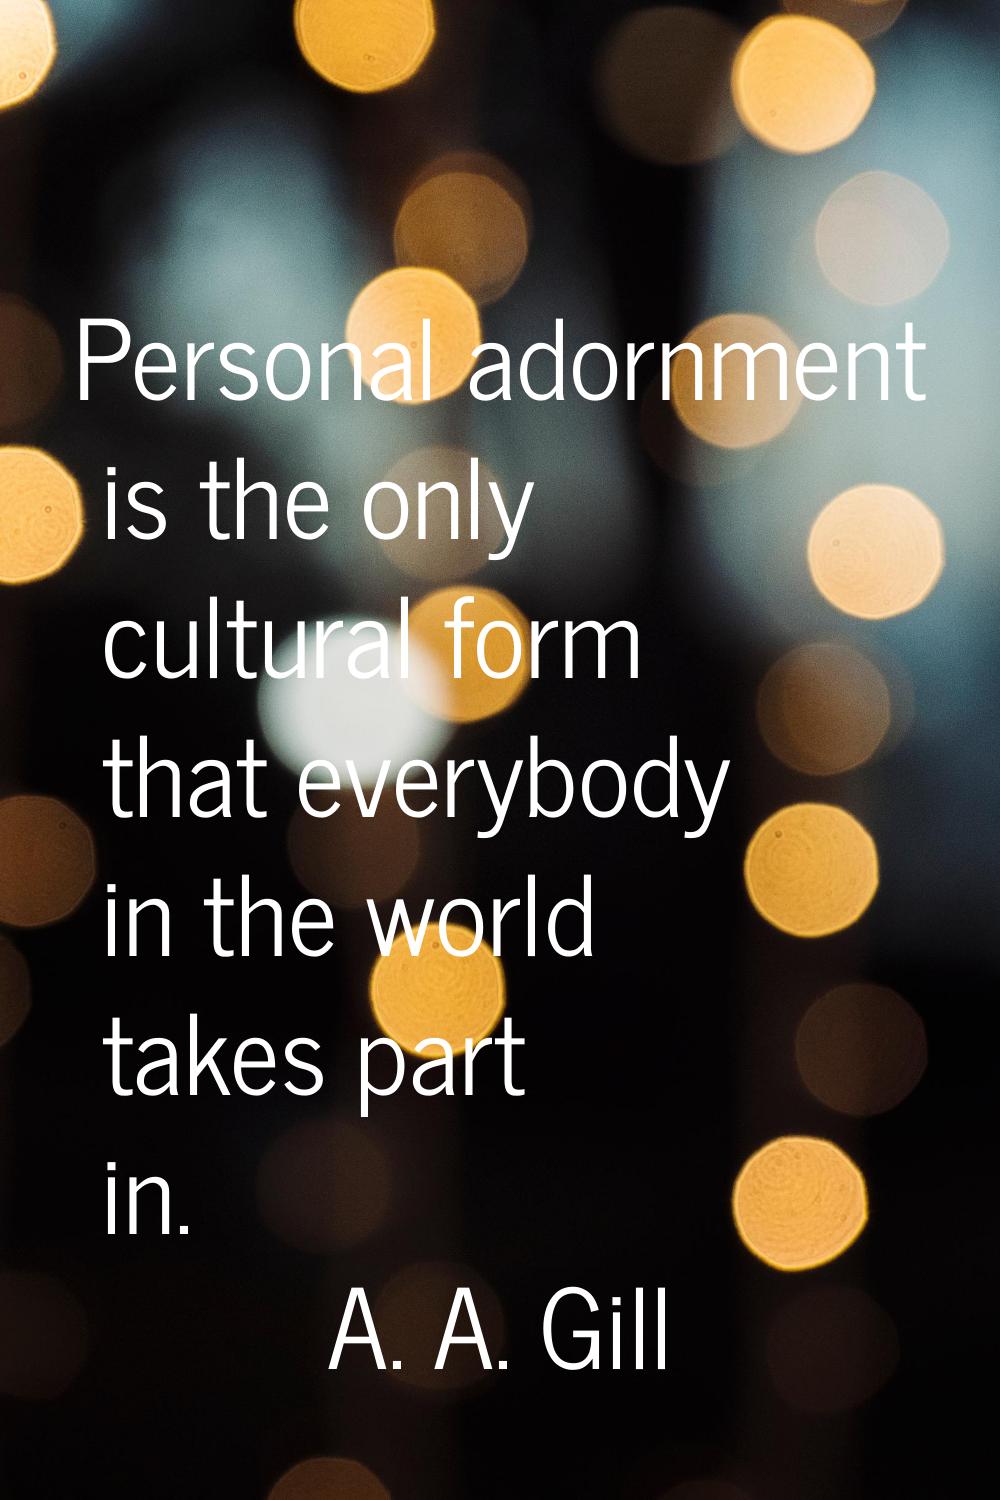 Personal adornment is the only cultural form that everybody in the world takes part in.